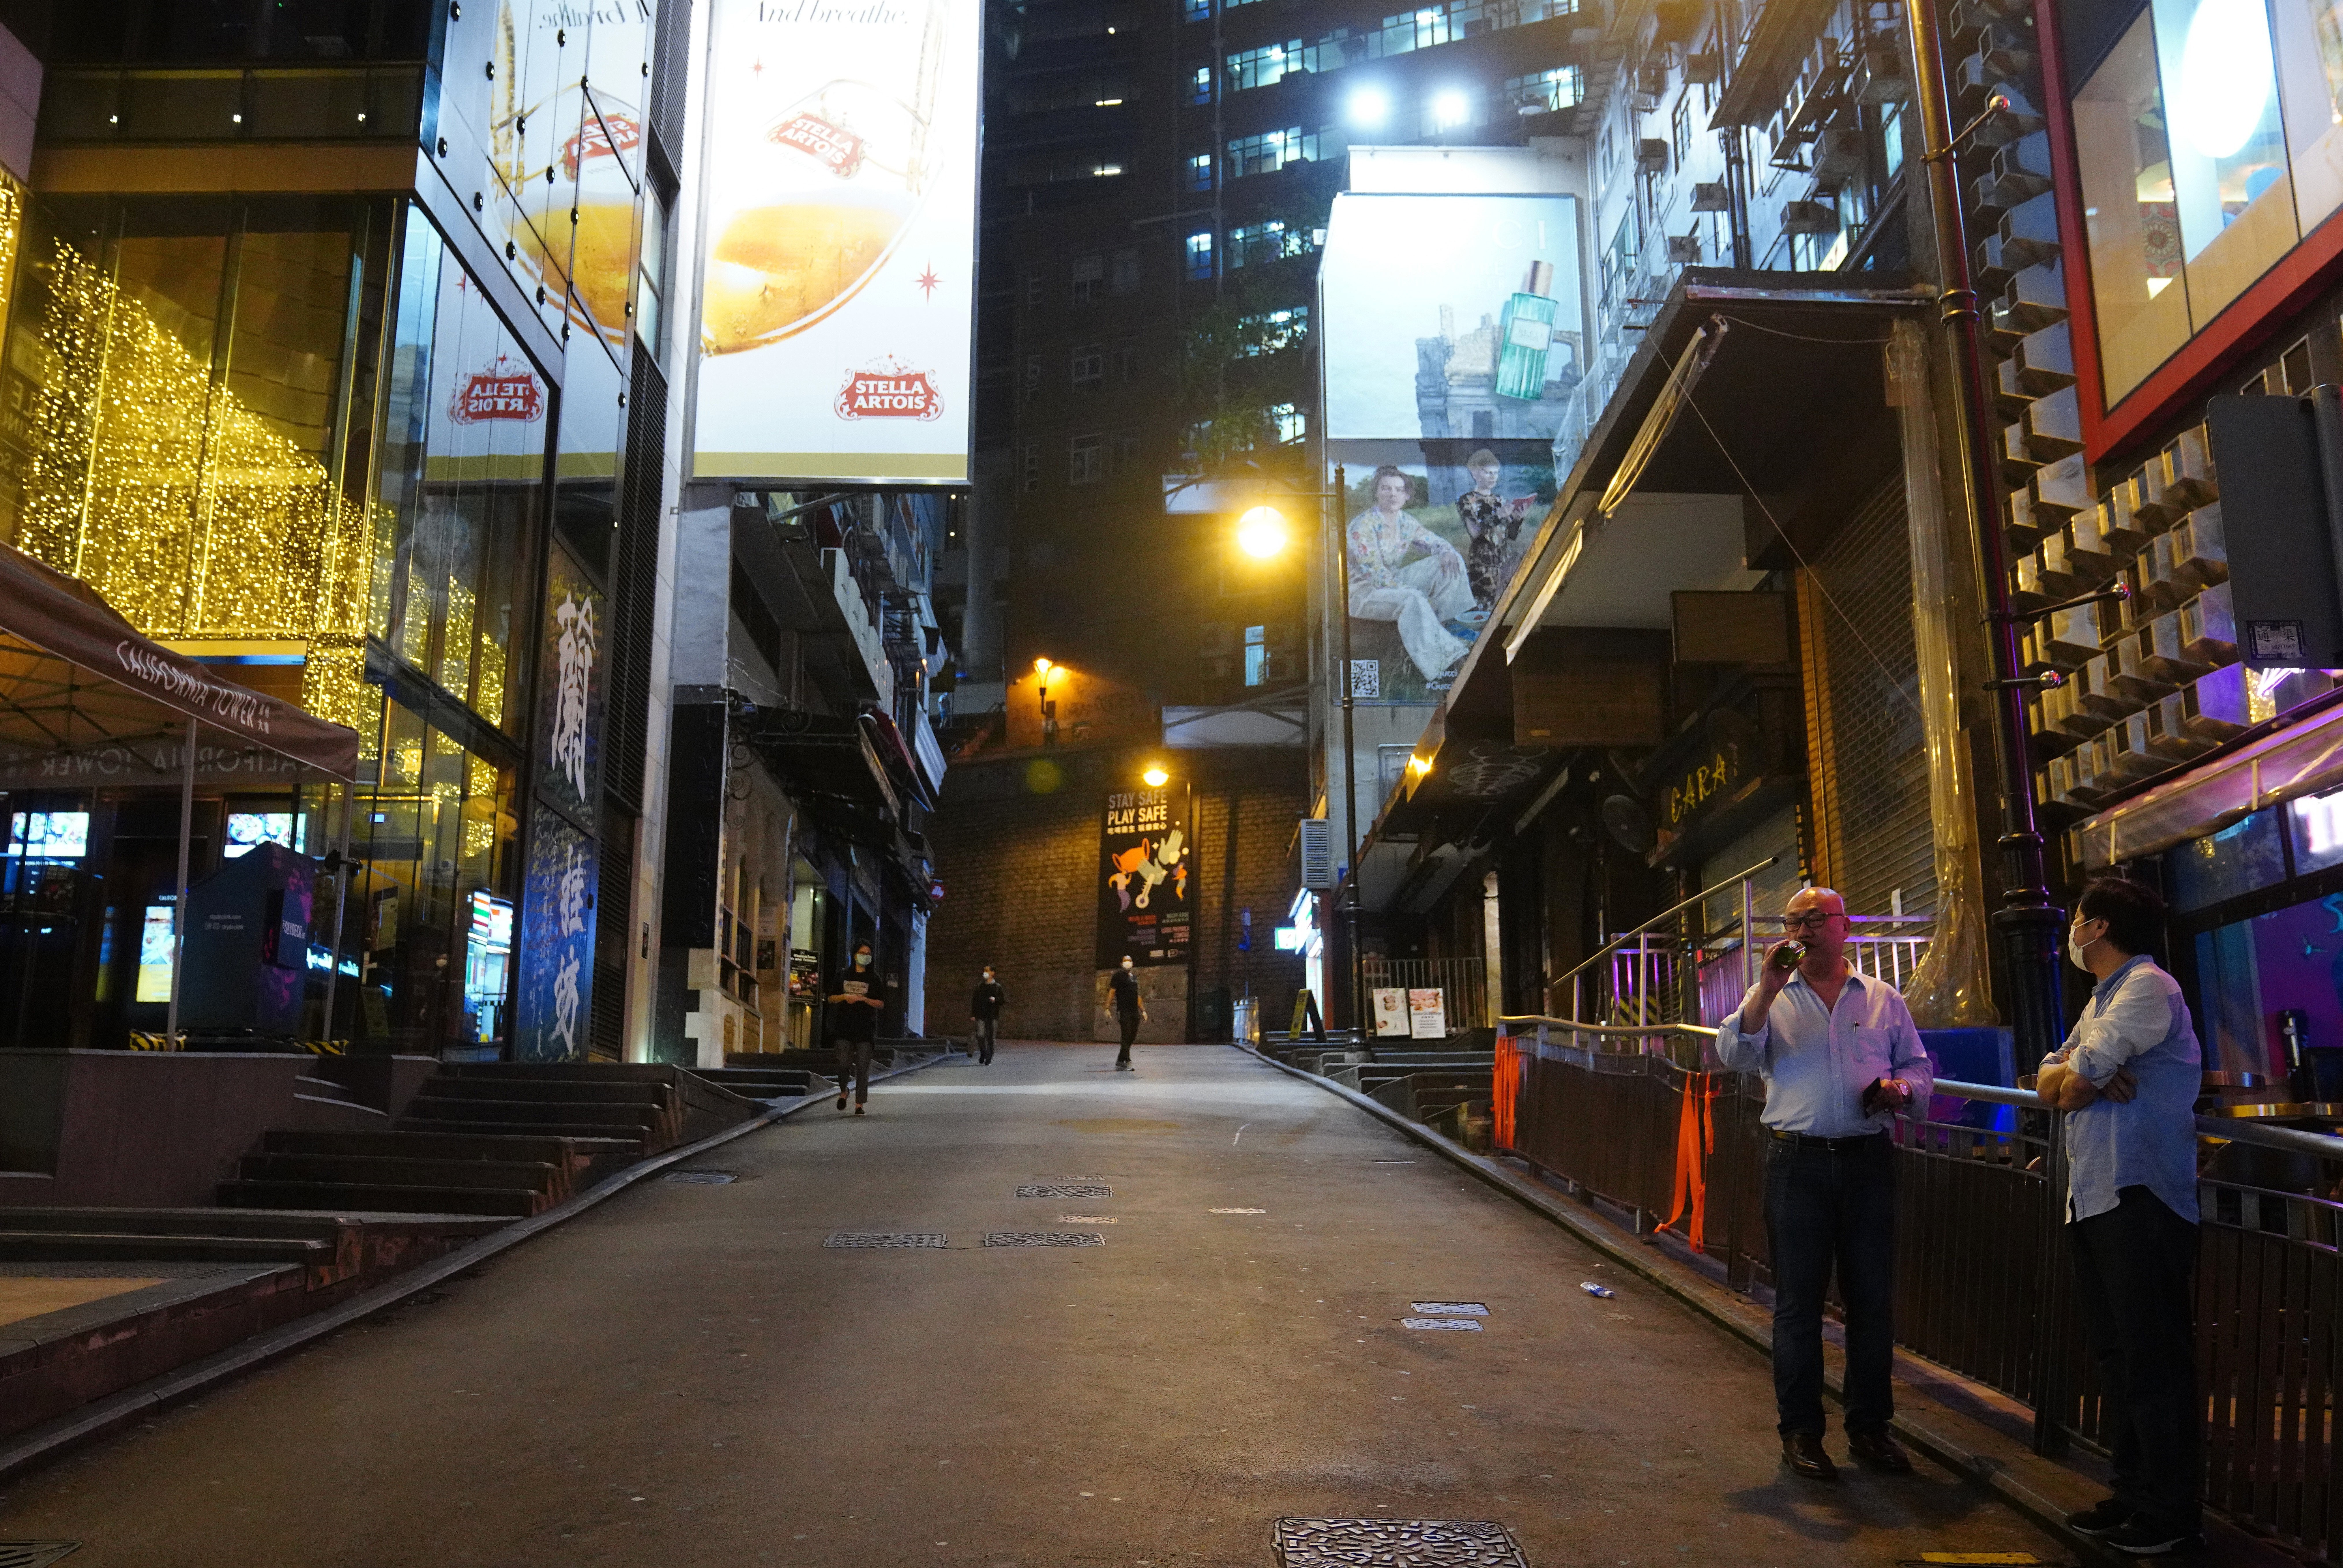 Bars and pubs in areas such as Lan Kwai Fong will have to close under a new order from the government designed to stop Covid-19’s spread. Photo: Sam Tsang